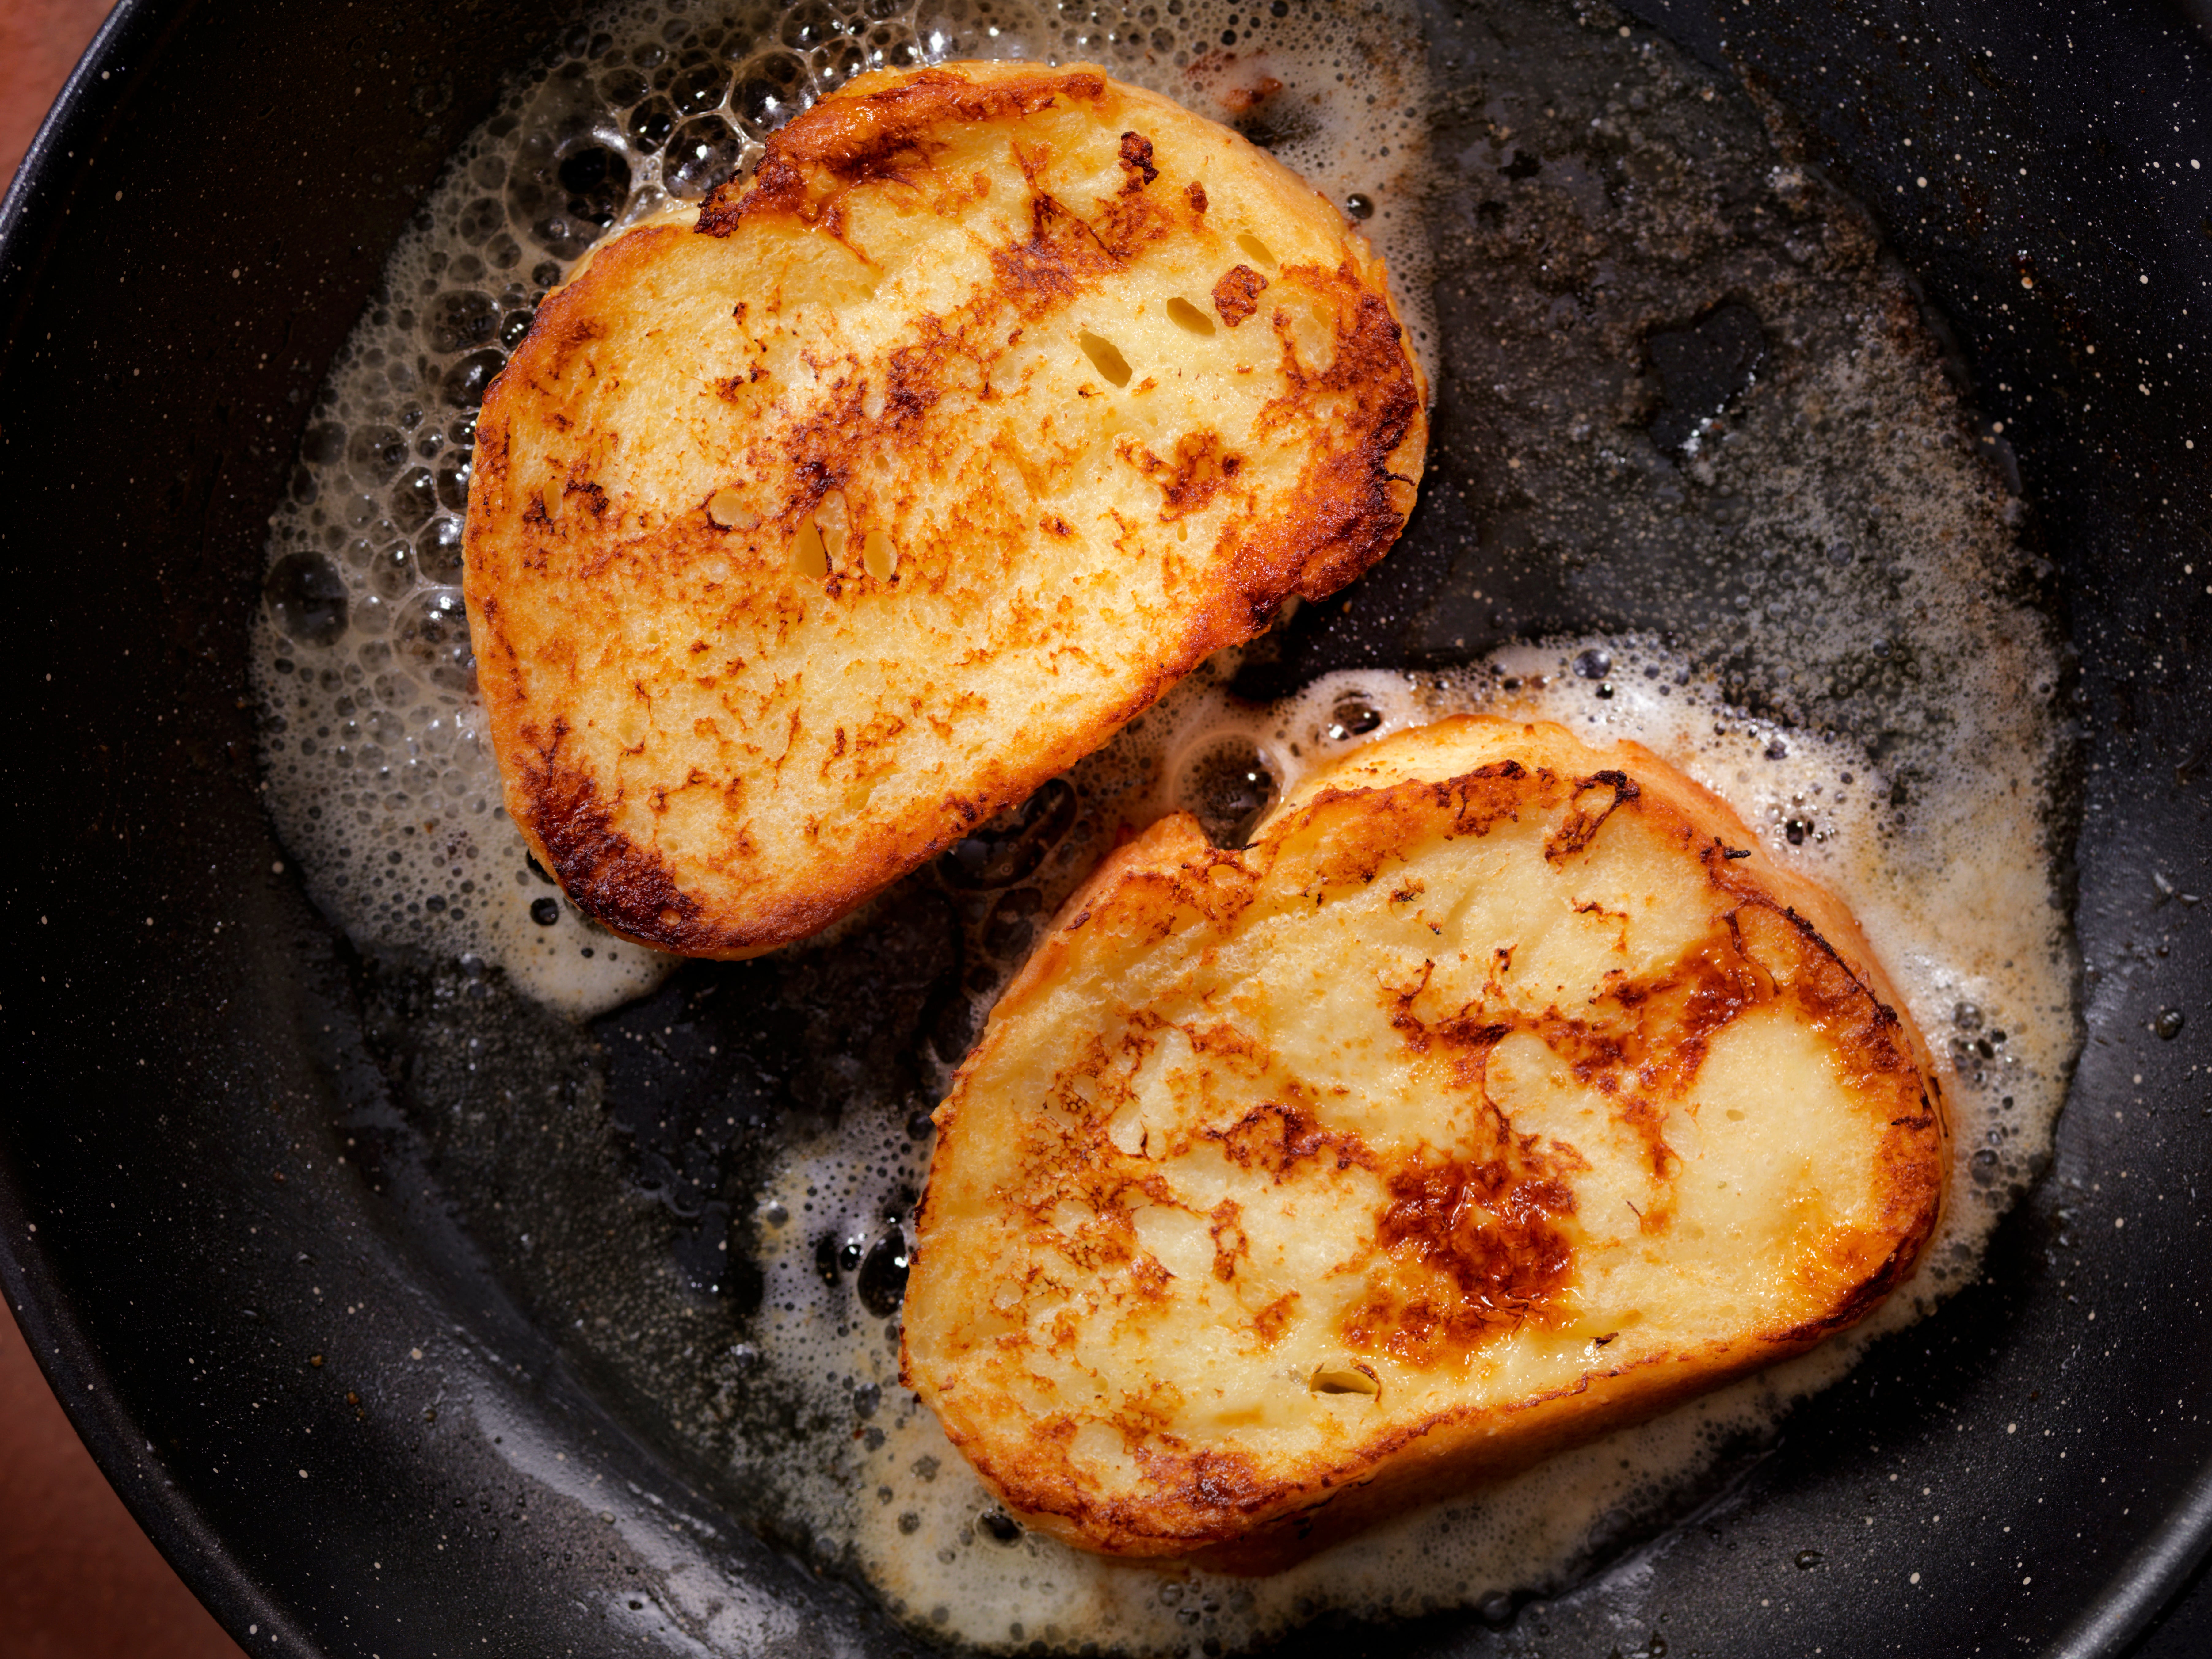 Few dishes can do that better than really good French toast